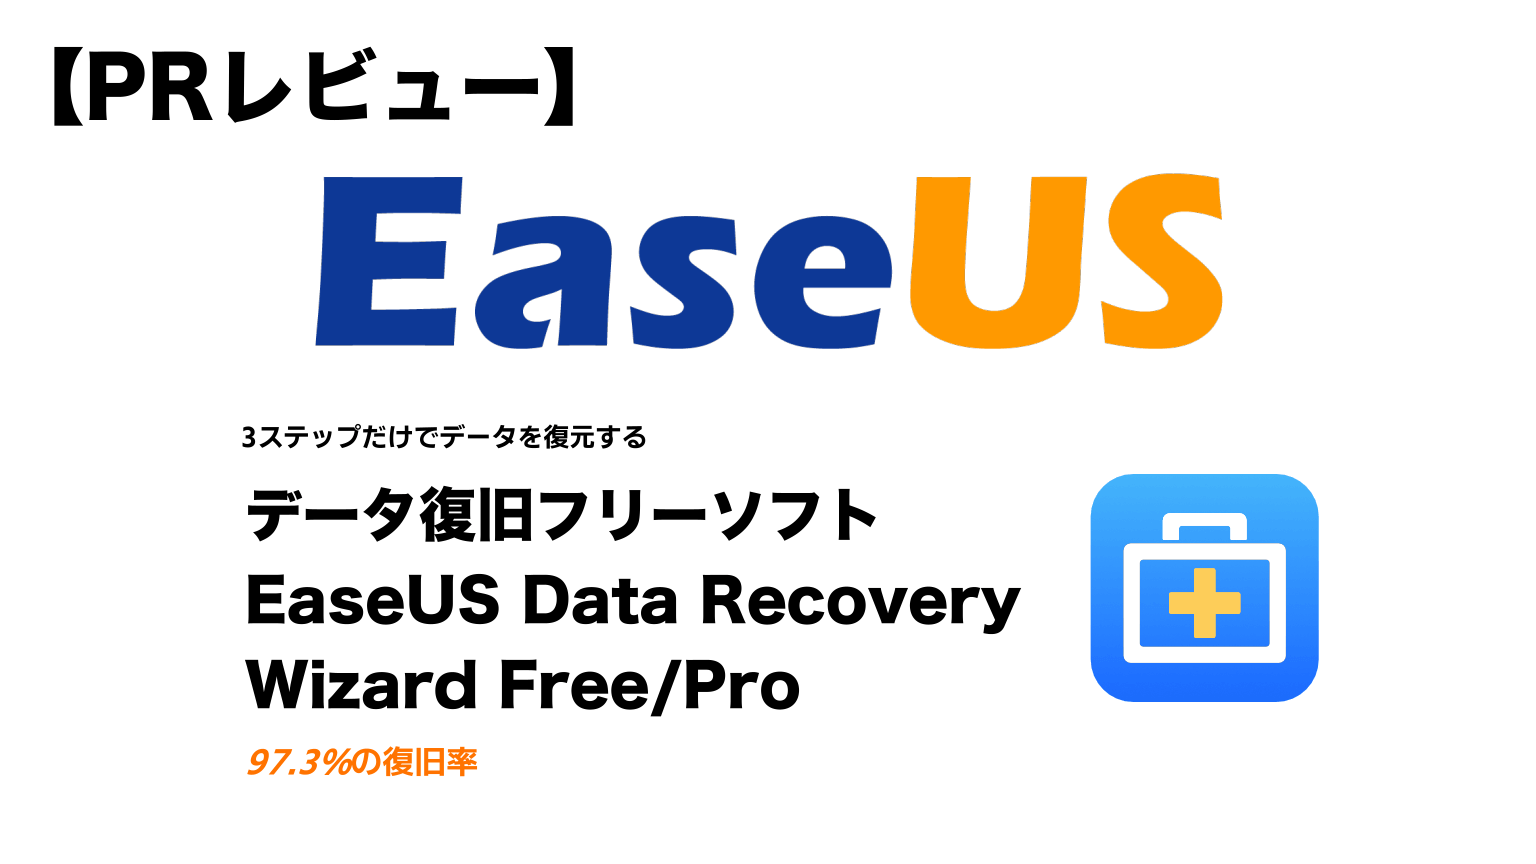 【PRレビュー】EaseUS Data Recovery Wizard Free/Pro